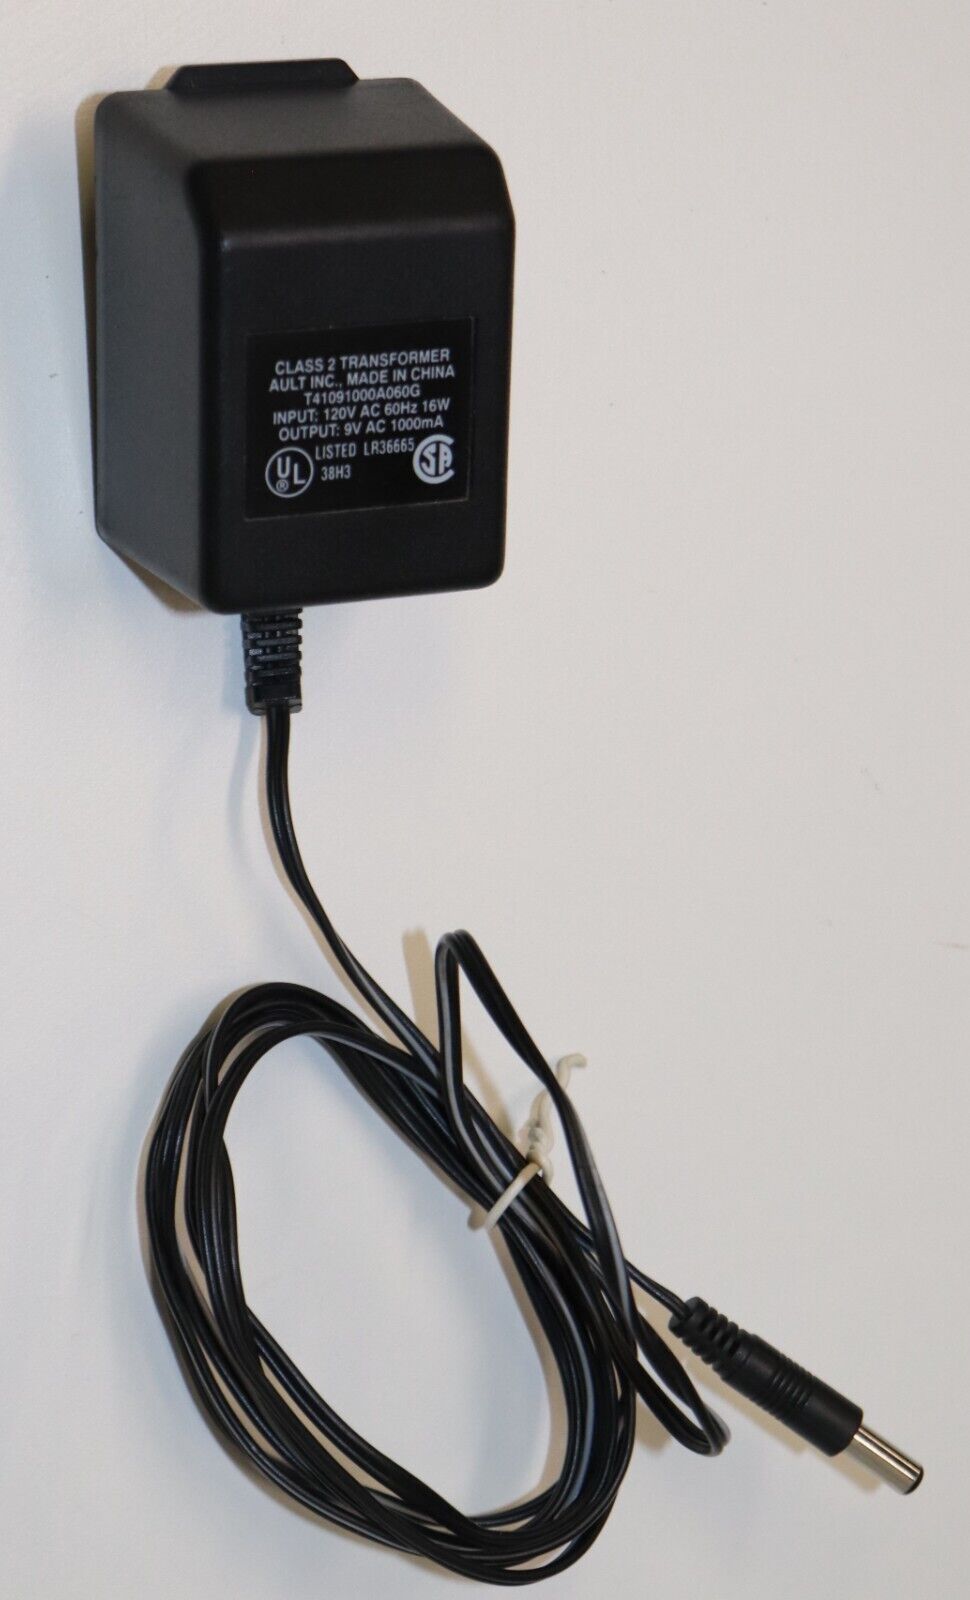 *Brand NEW* AULT 9VAC 1000mA AC Adapter T41091000A060G Class 2 Power Supply